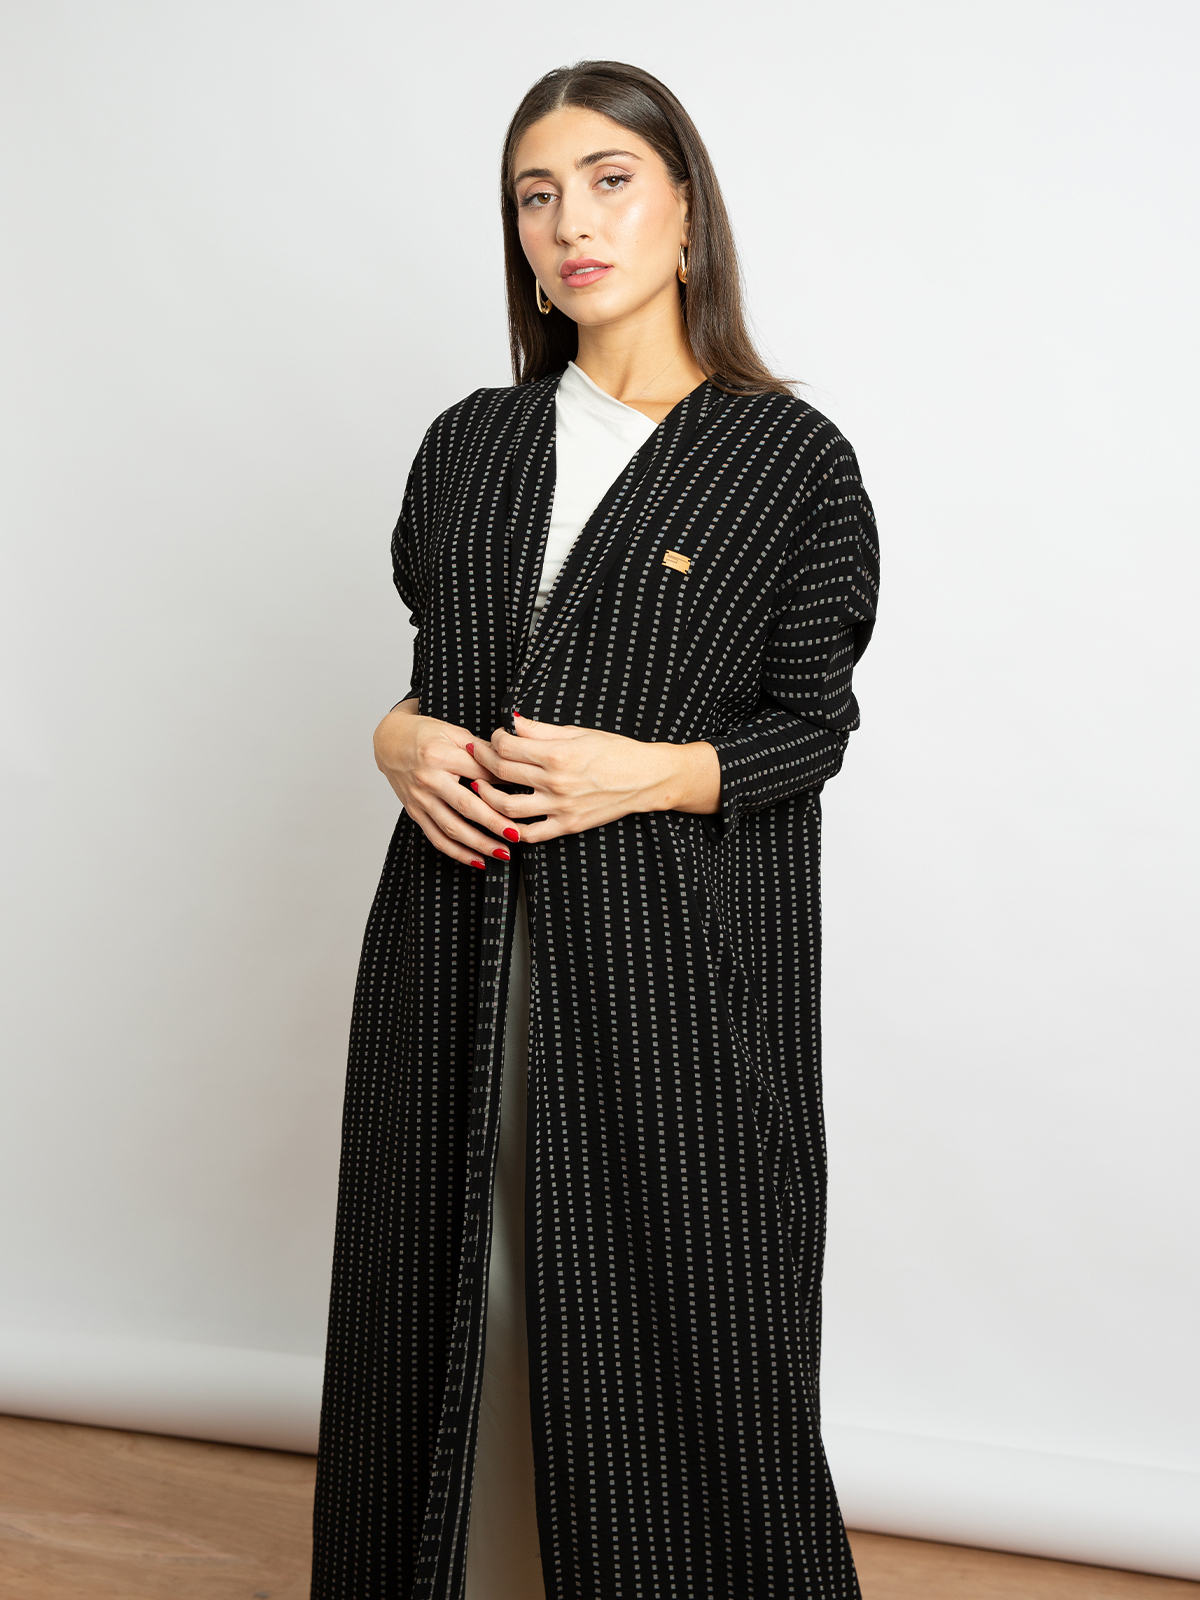 Long open half bisht abaya black with white stripes color in semi stretchy fabric for work and different activities